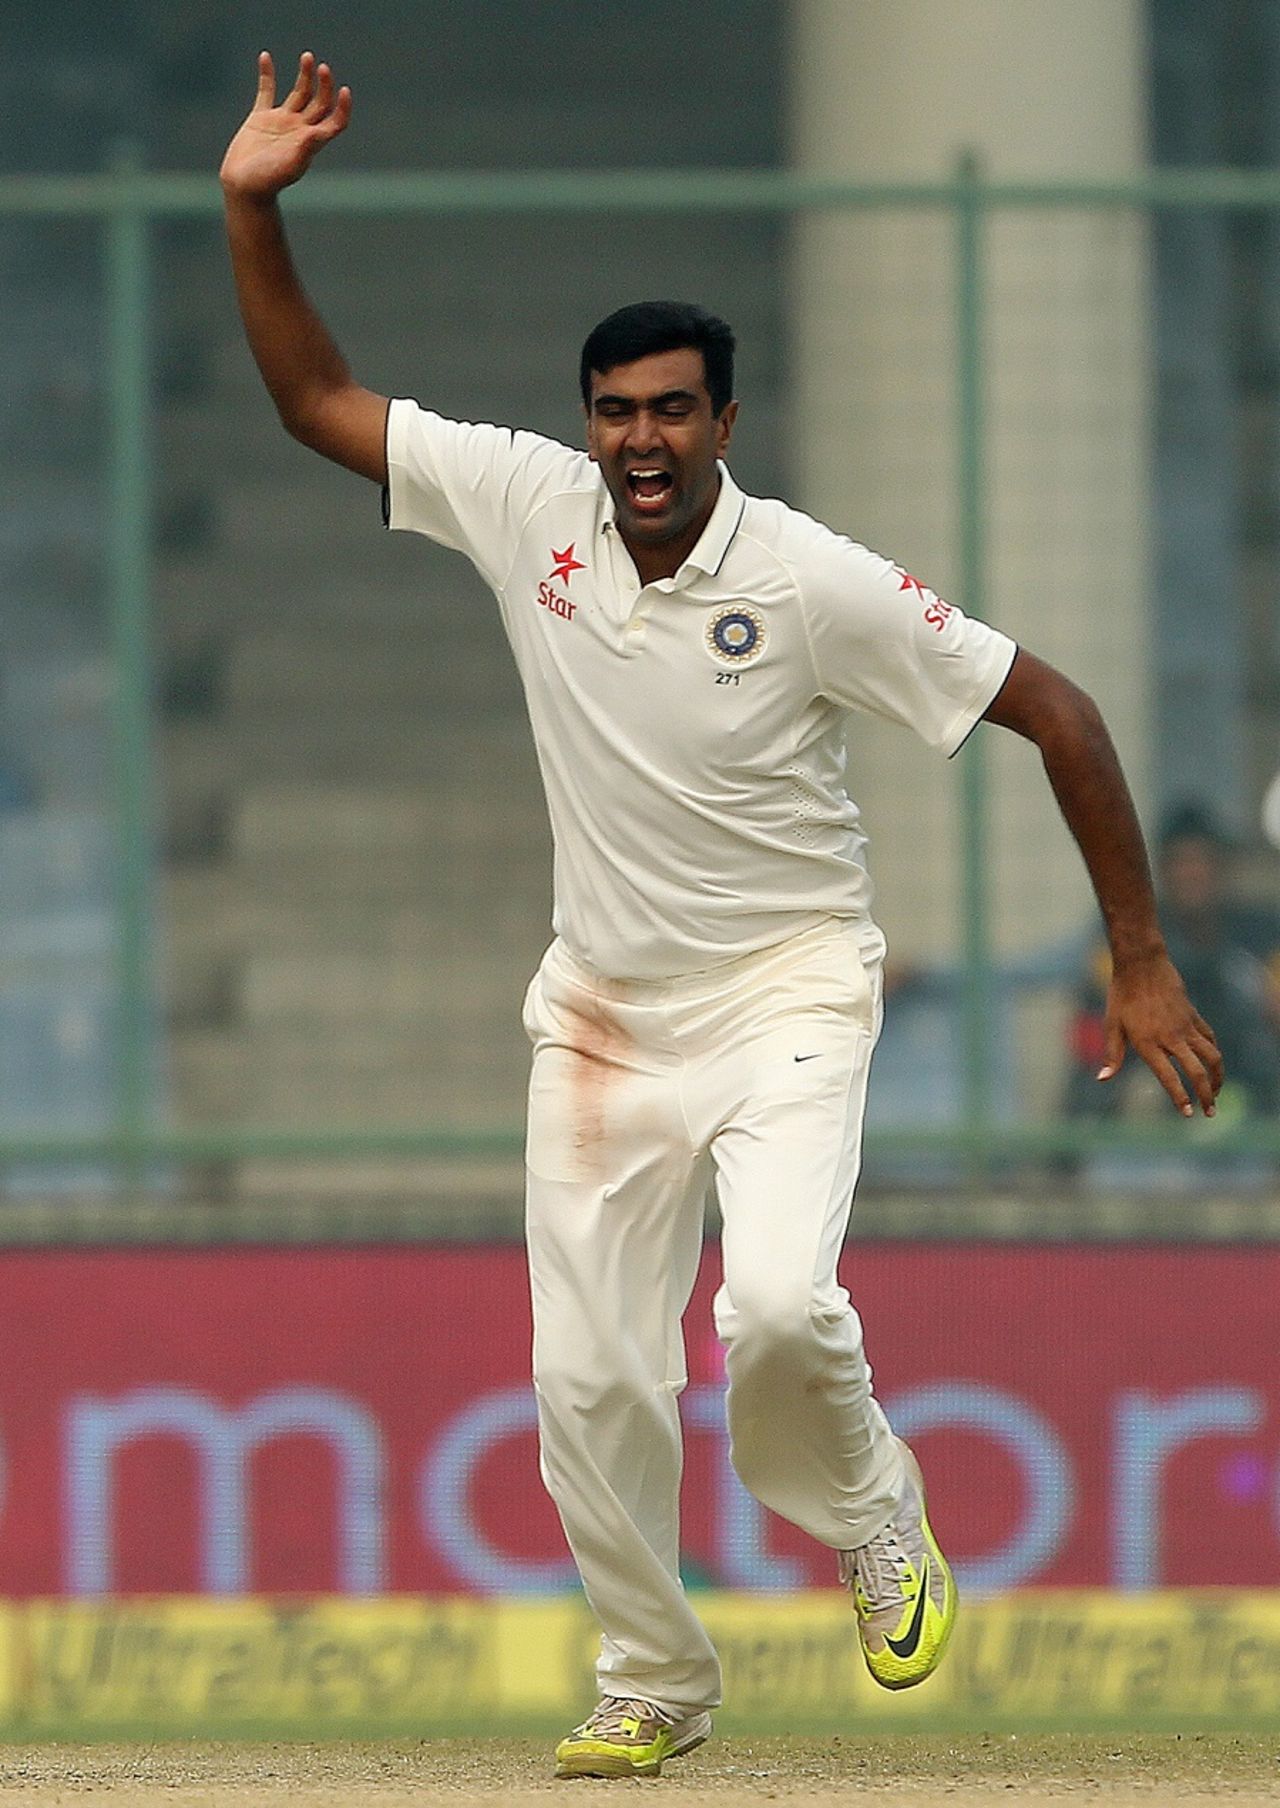 R Ashwin had JP Duminy lbw for a duck, India v South Africa, 4th Test, Delhi, 5th day, December 7, 2015